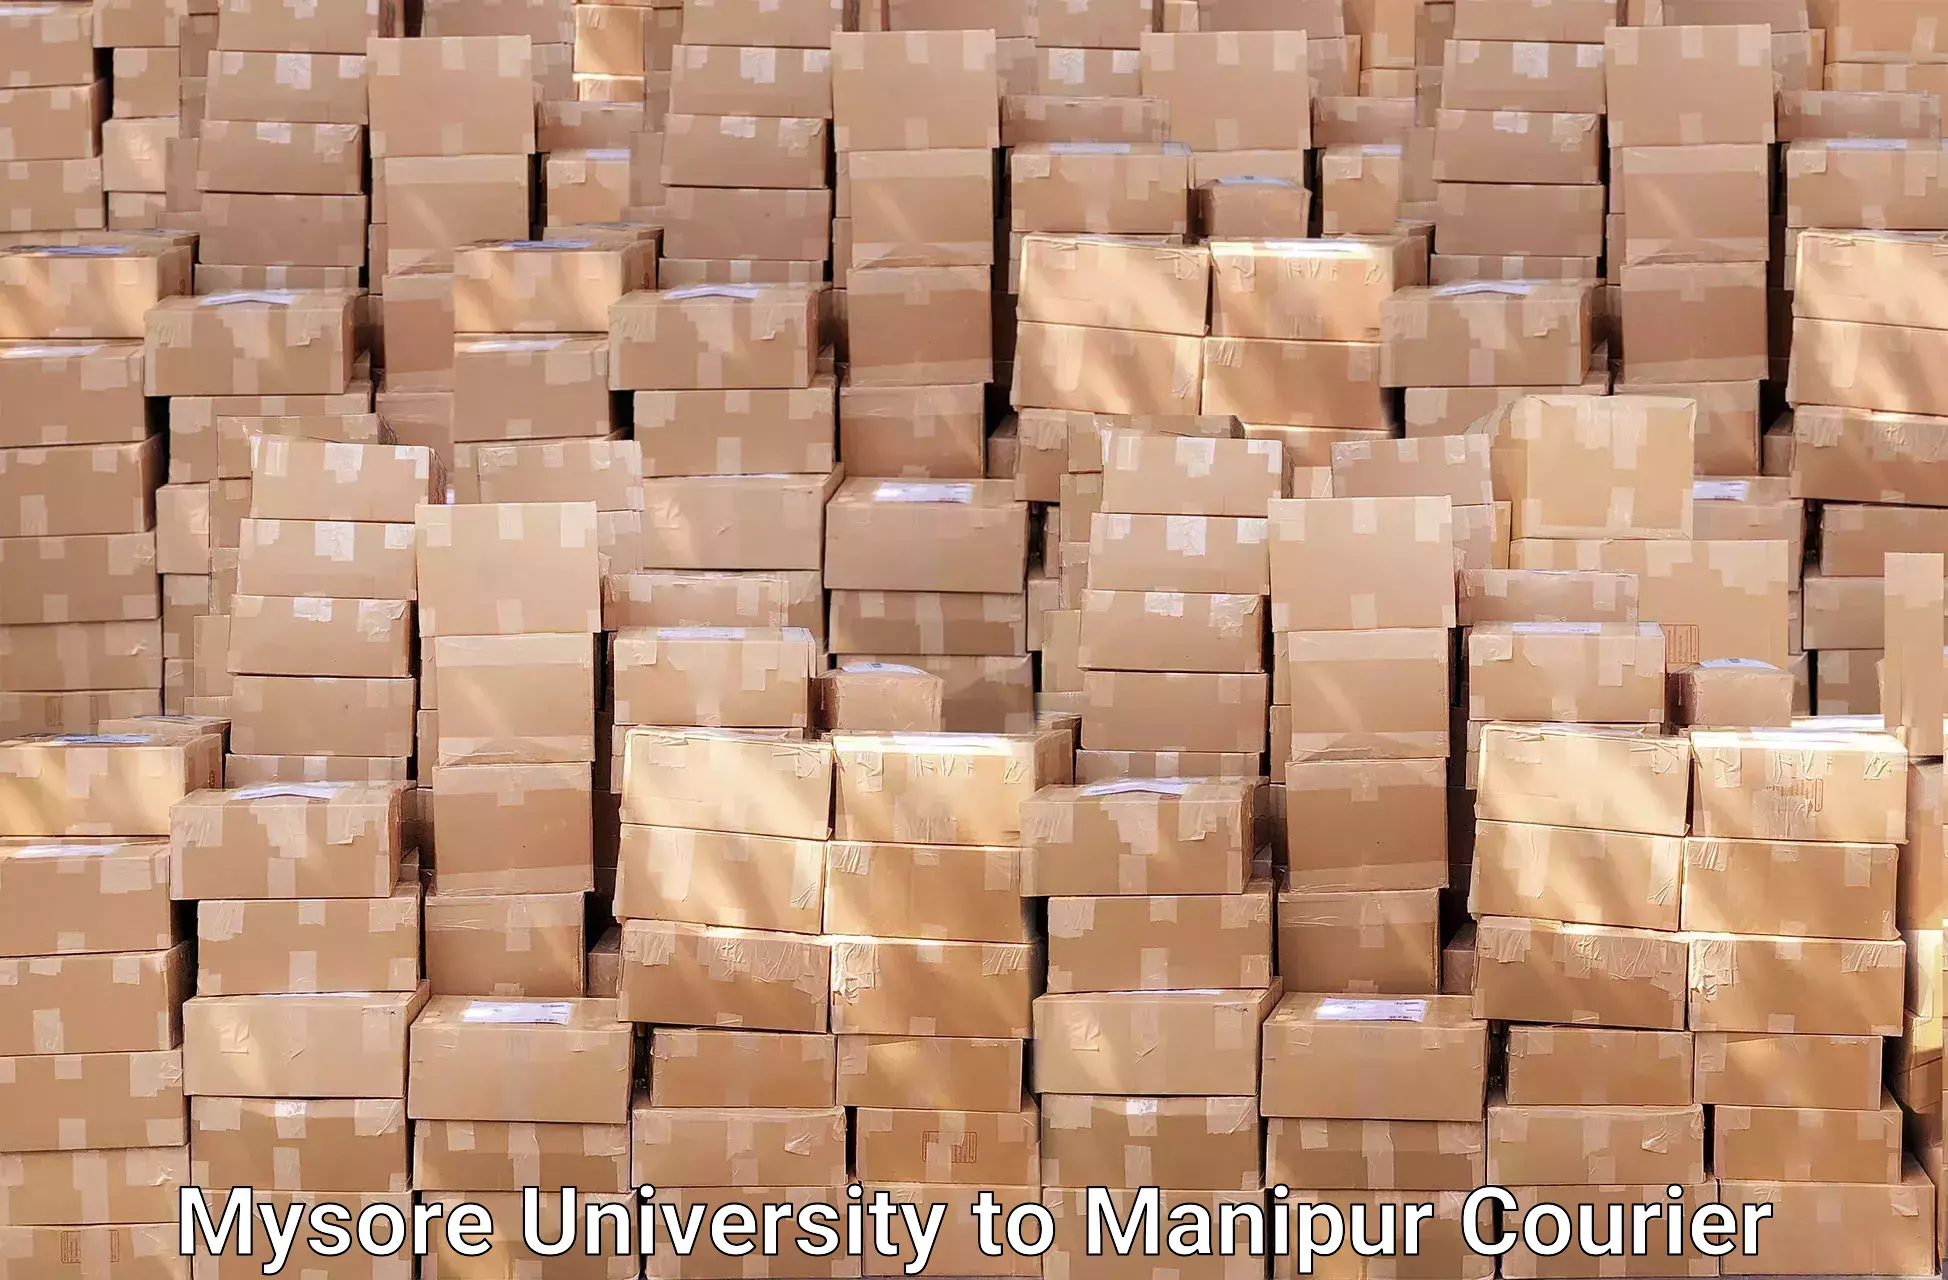 Professional packing and transport in Mysore University to Manipur